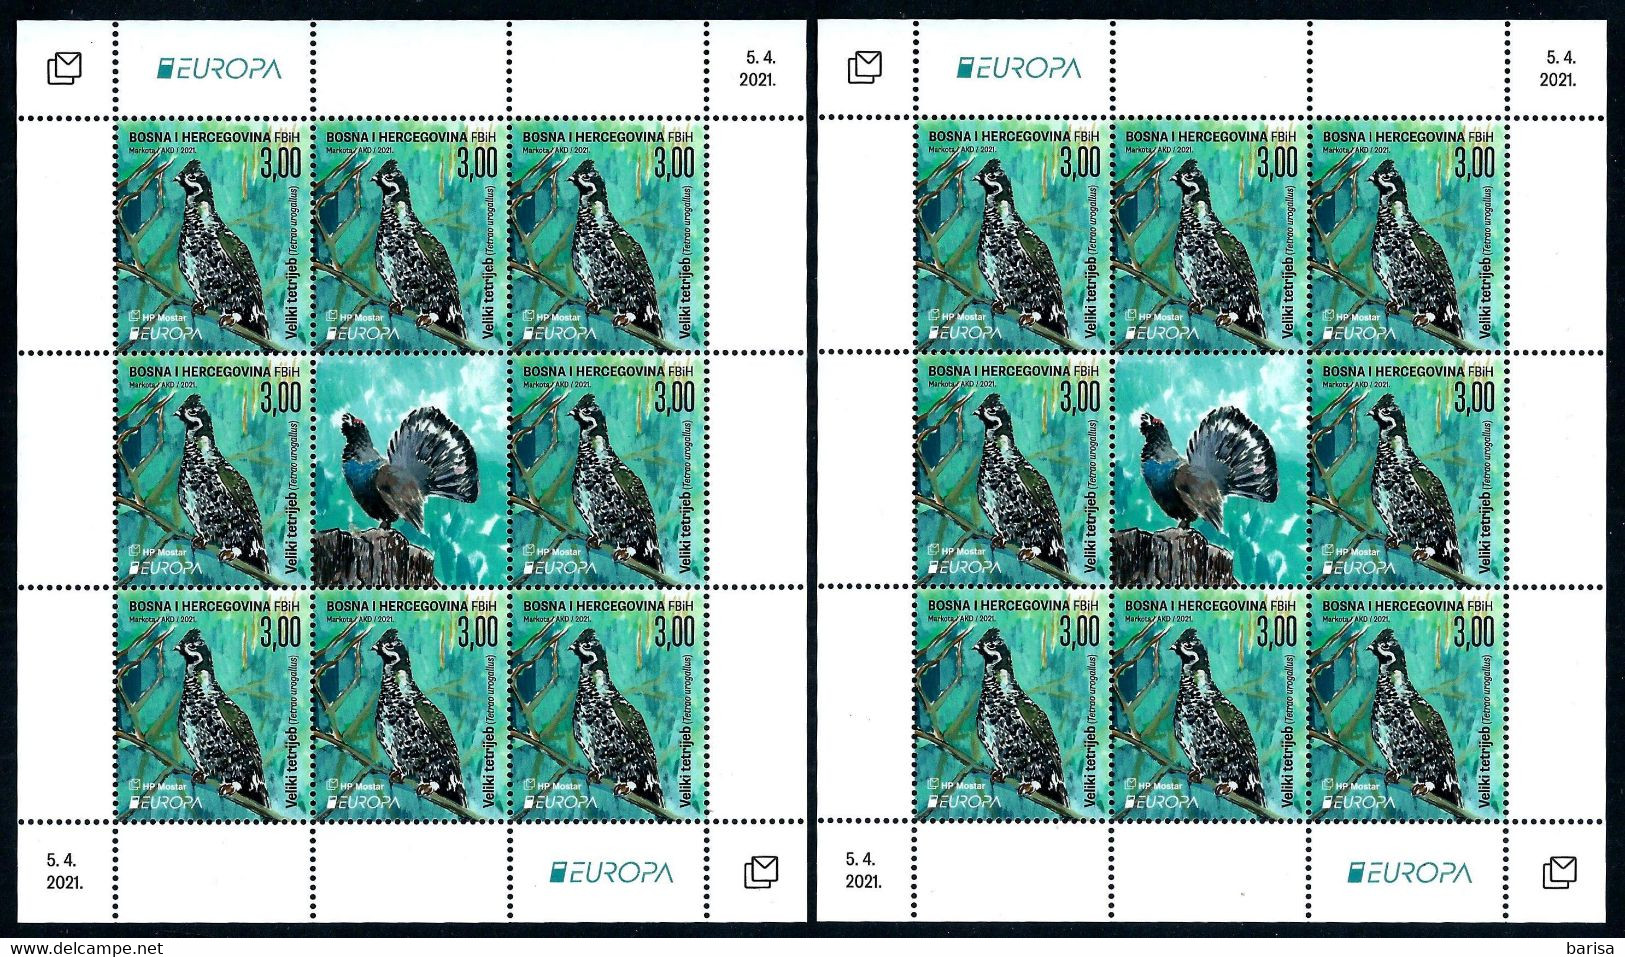 Bosnia And Herzegovina (Mostar) 2021: Europa - Endangered National Wildlife; 8 Complete Sets In 2 Small Sheets. MNH** - 2021